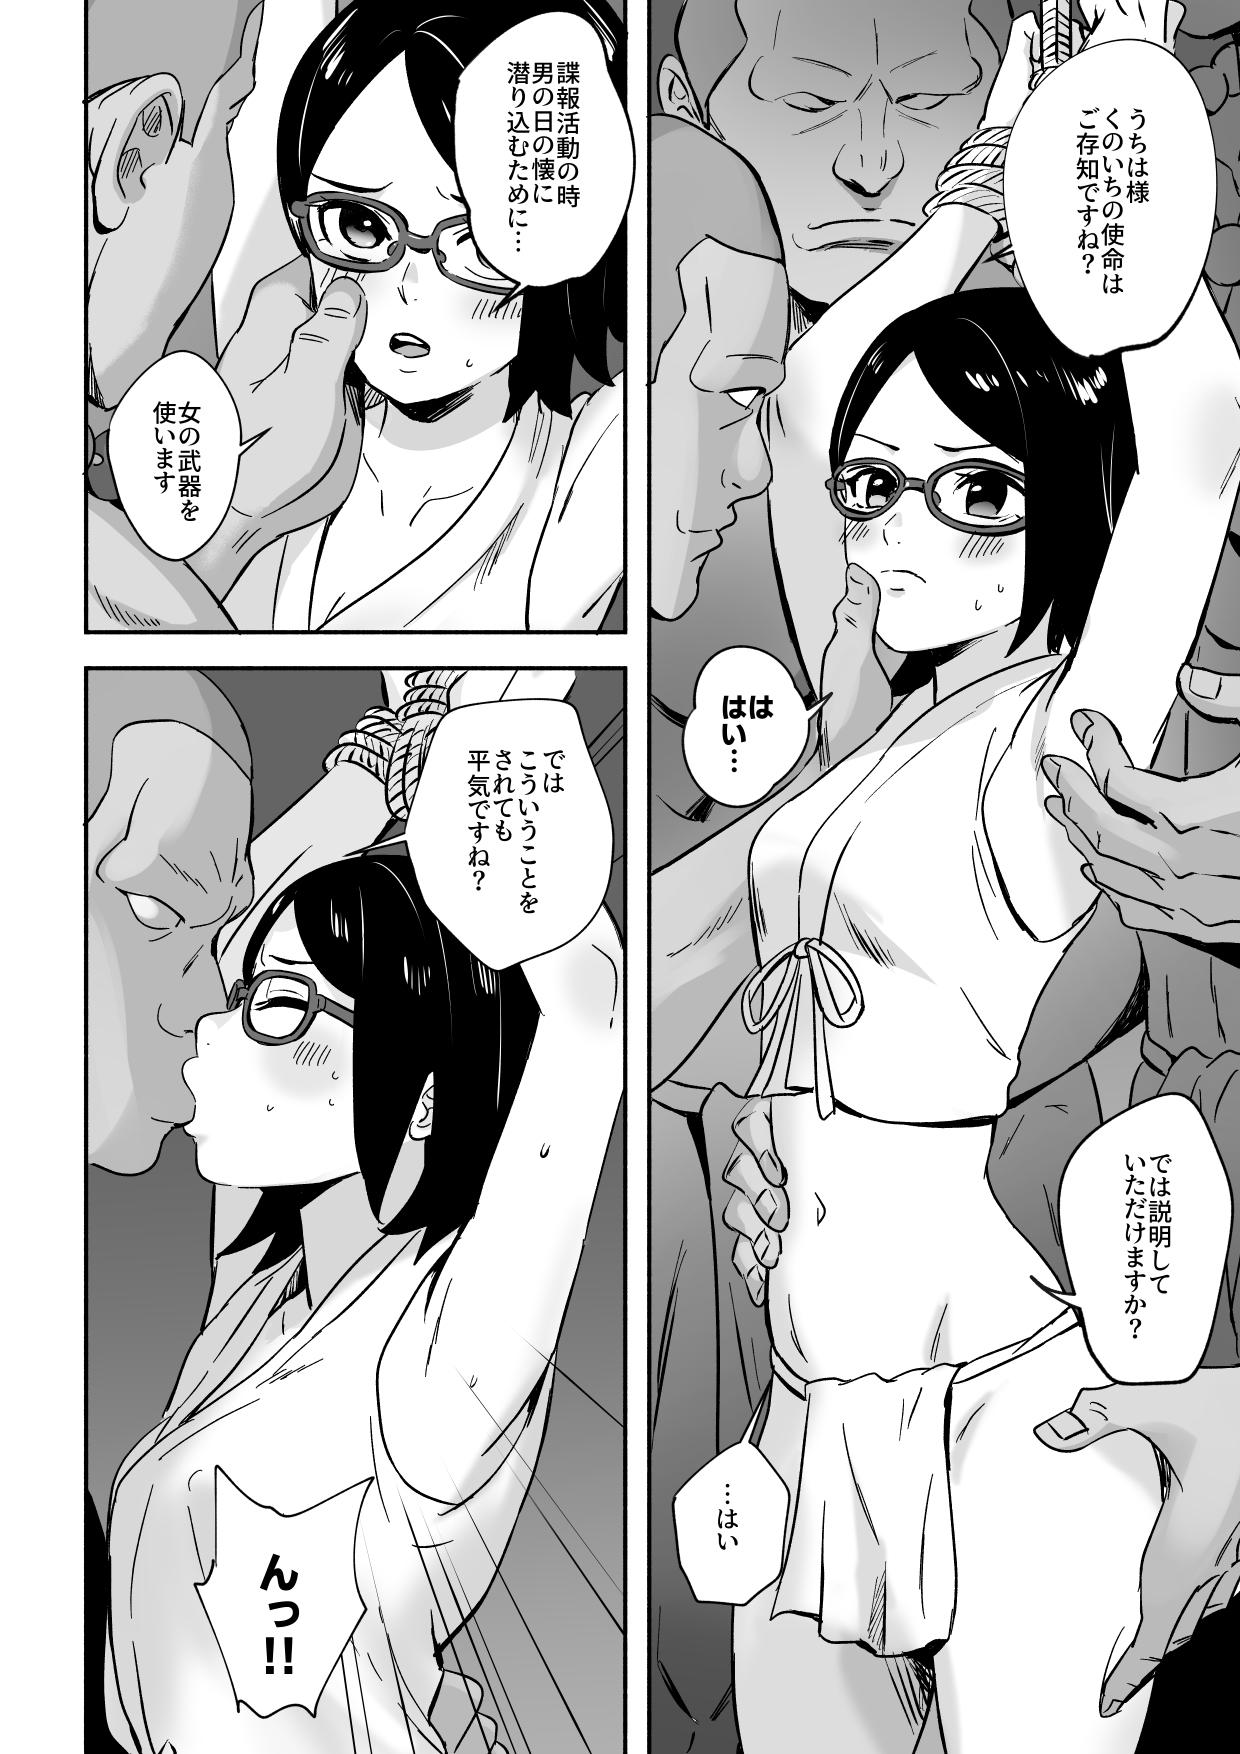 Ftv Girls A book about training and tricking Sarada-chan, who had her chakra sealed, into doing erotic things - Naruto Boruto Kissing - Page 6